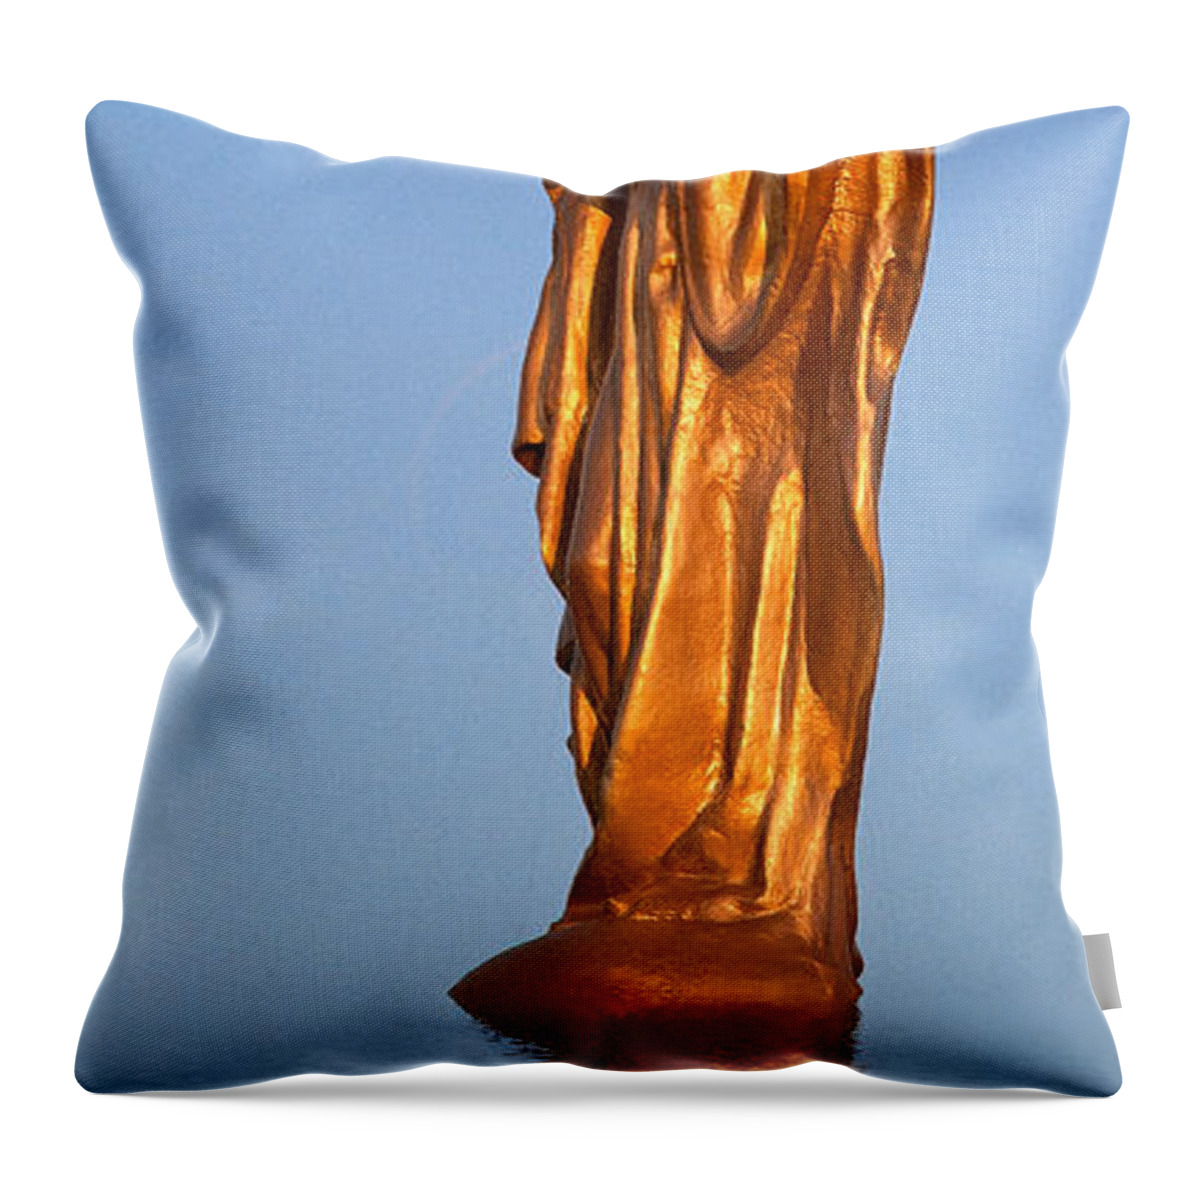 Welcoming Throw Pillow featuring the photograph Welcoming 2 by WB Johnston